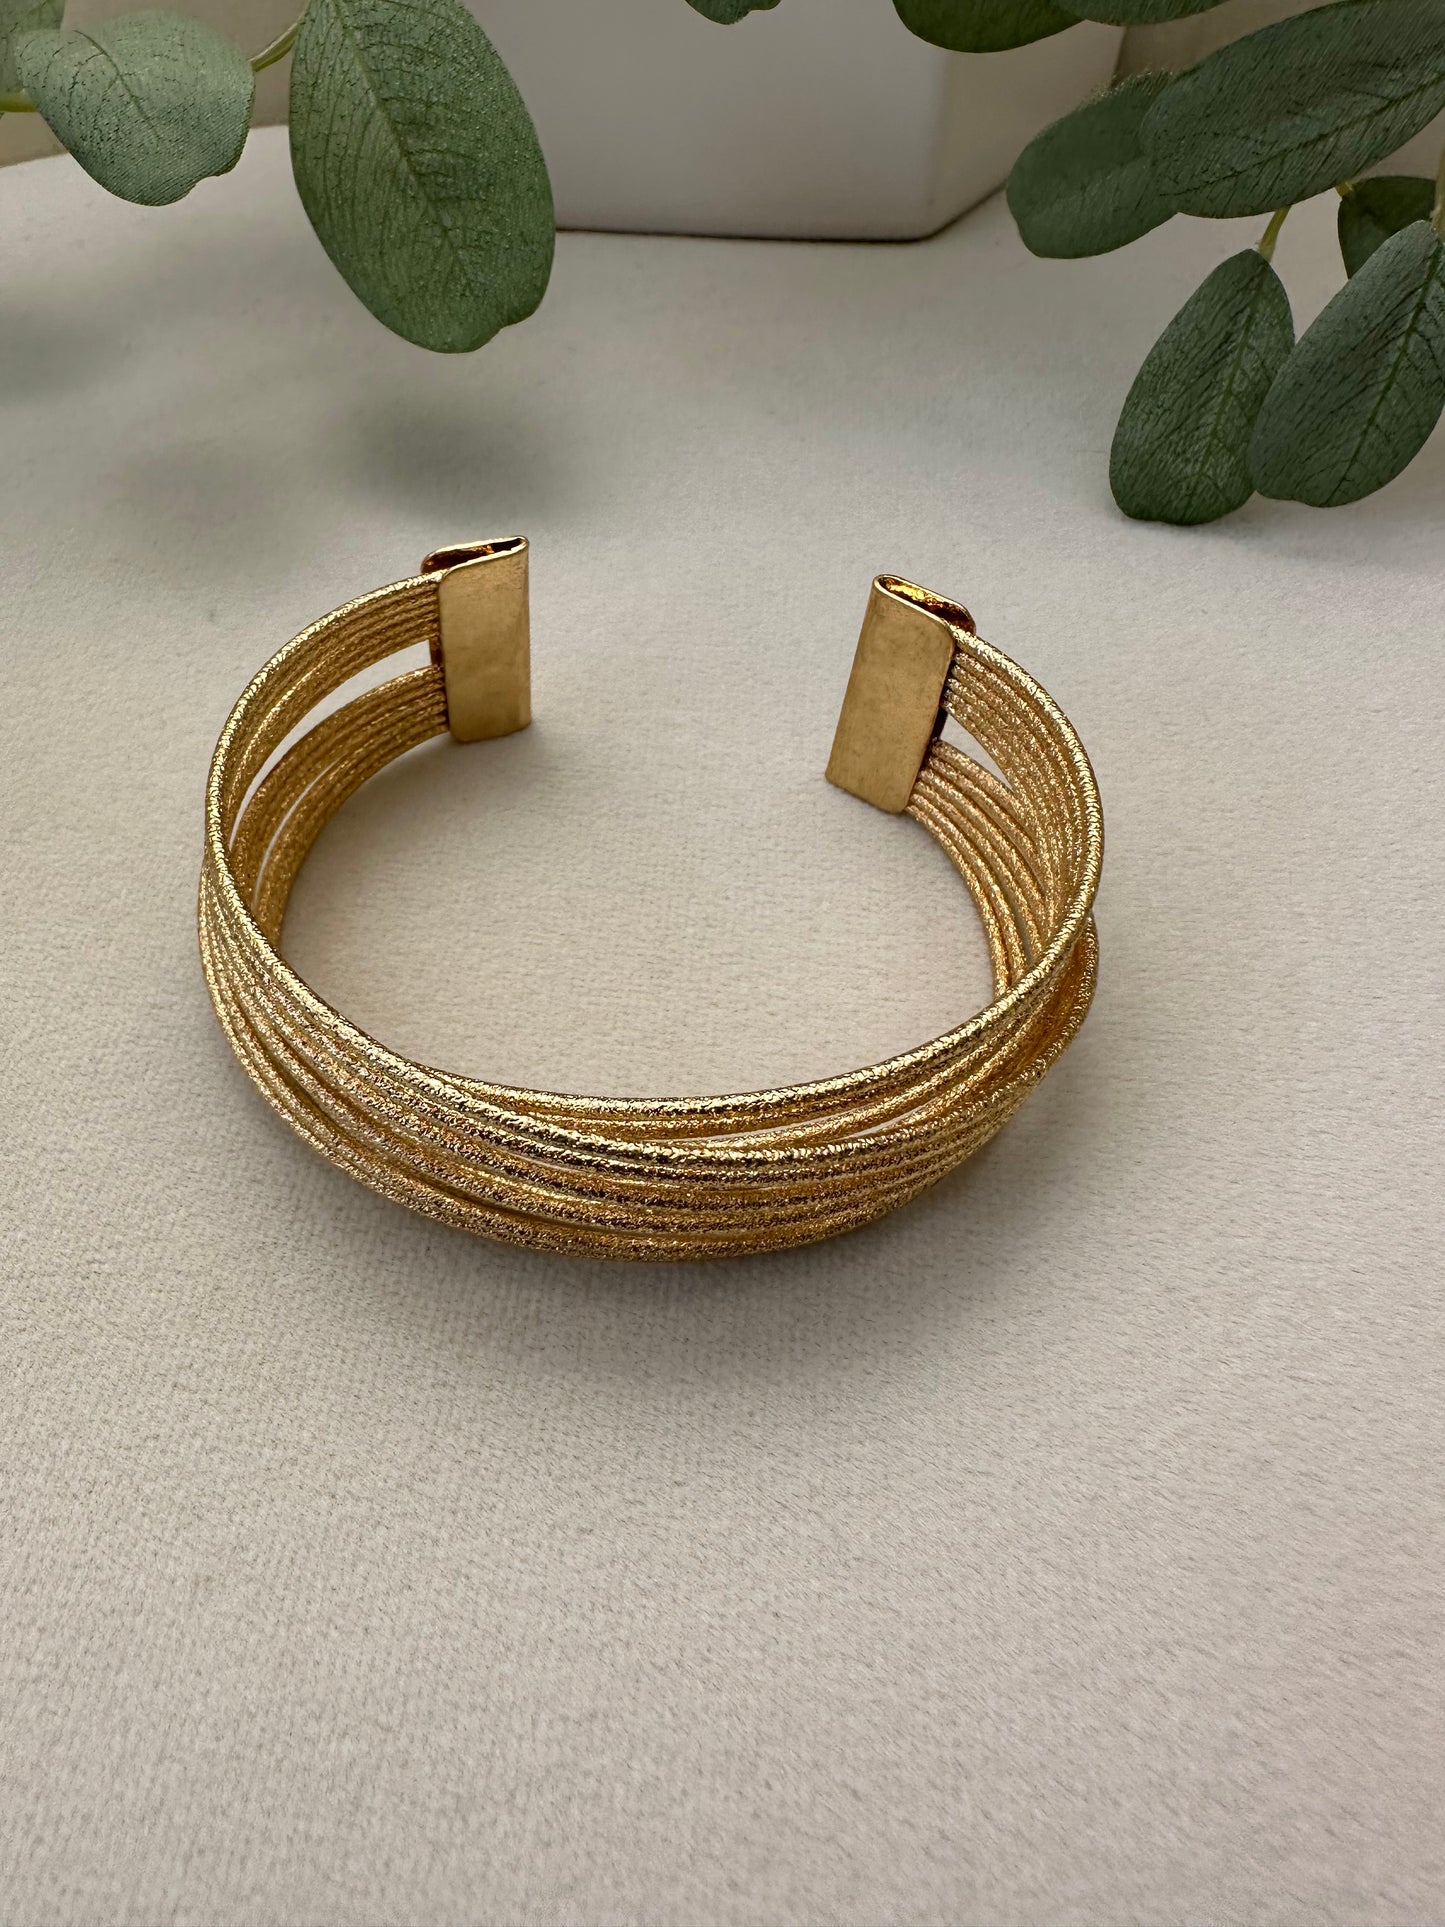 Textured Double Layer Cuff Bracelet